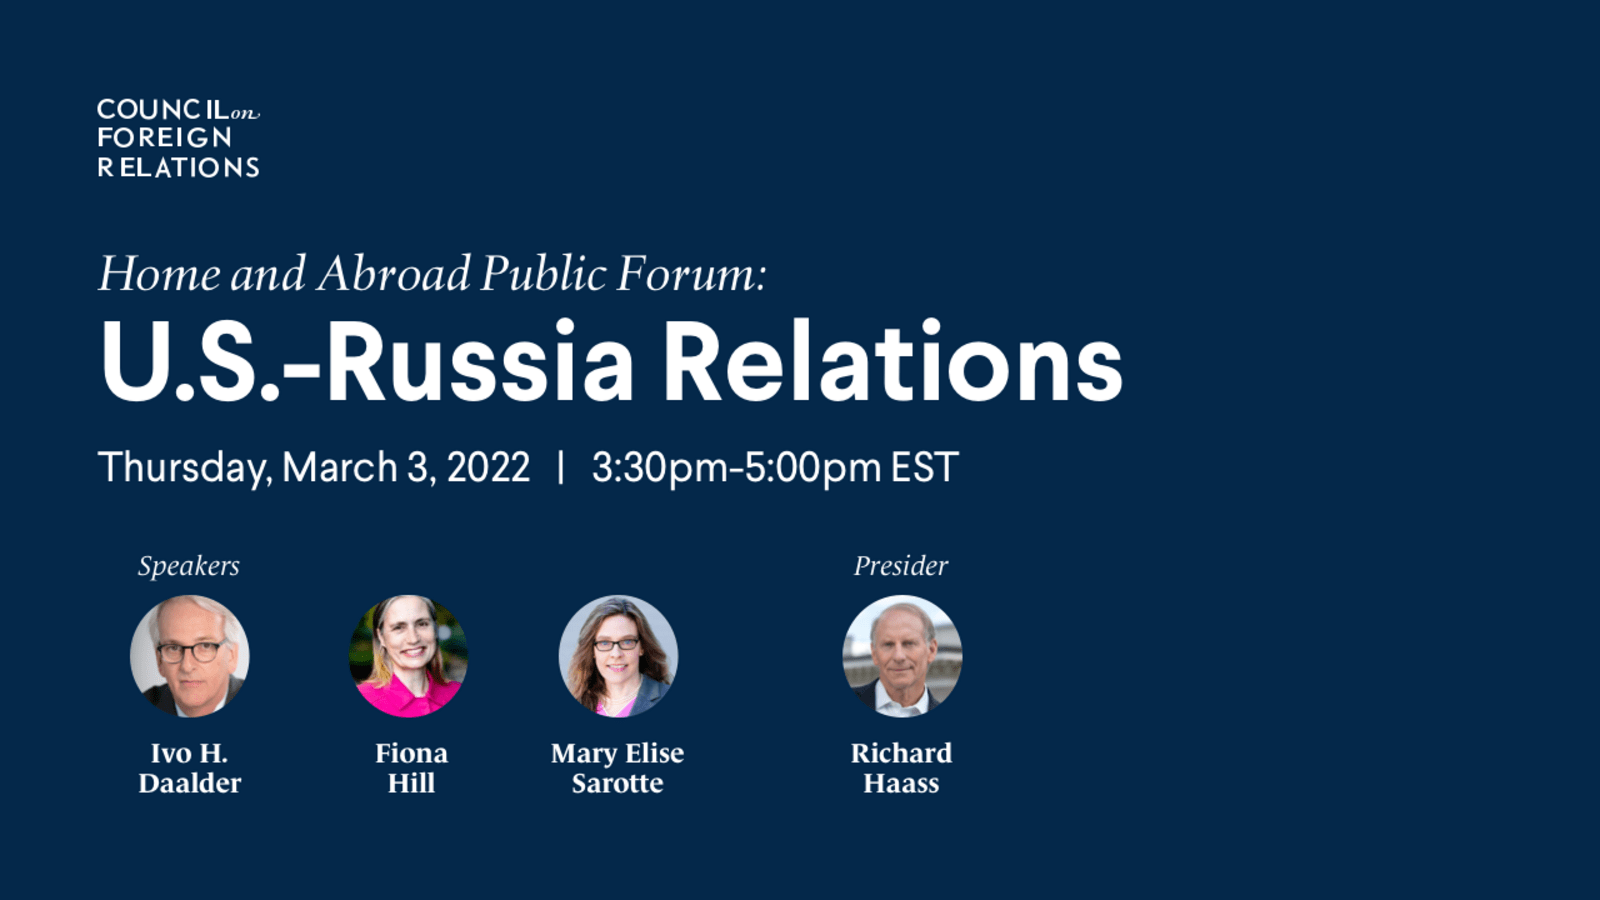 Home and Abroad Public Forum U.S.-Russia Relations Council on Foreign Relations image